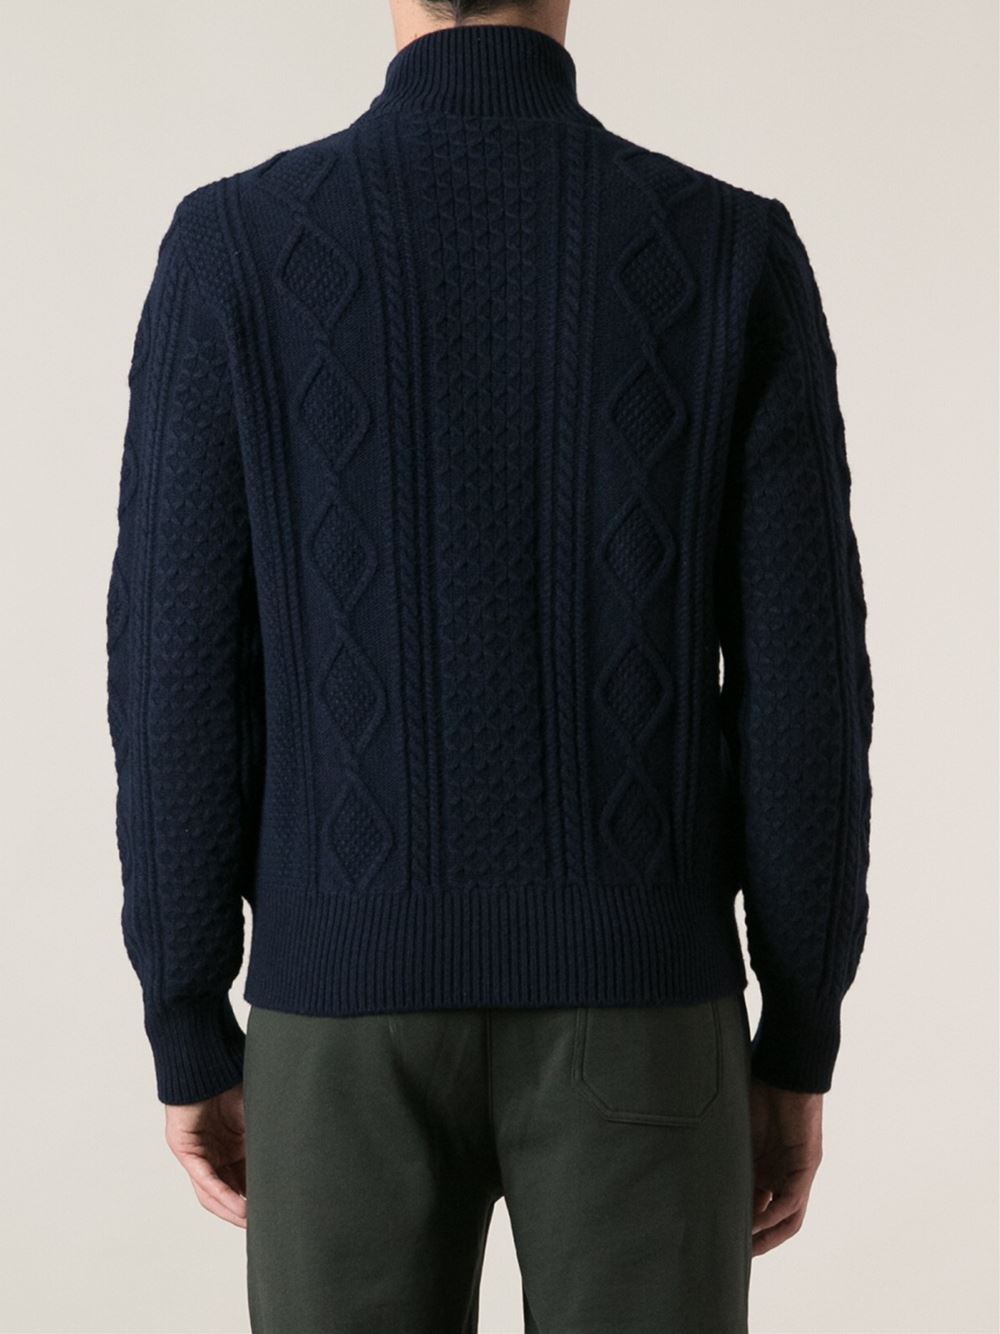 Lyst - Moncler Padded Cardigan in Blue for Men